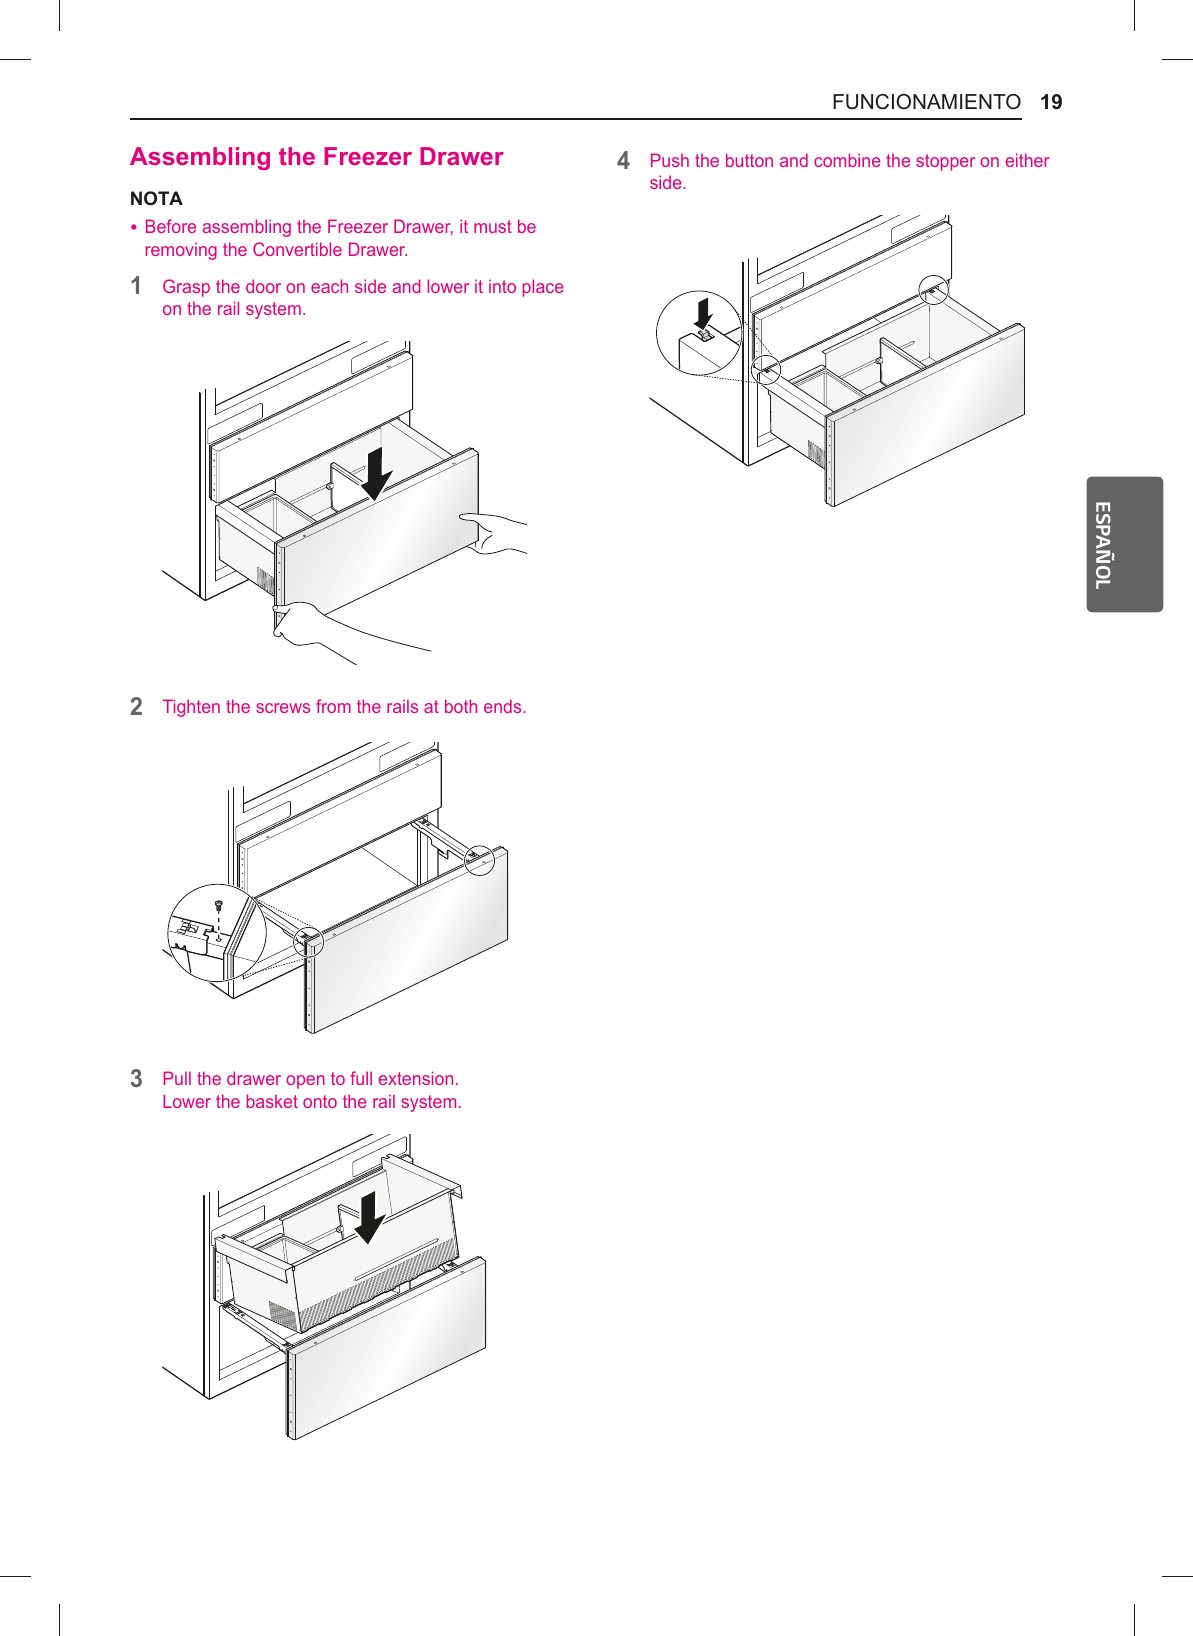 19FUNCIONAMIENTOESPAÑOLAssembling the Freezer DrawerNOTA %Before assembling the Freezer Drawer, it must be removing the Convertible Drawer. 1Grasp the door on each side and lower it into place on the rail system.2Tighten the screws from the rails at both ends. 3Pull the drawer open to full extension. Lower the basket onto the rail system.4Push the button and combine the stopper on either side.